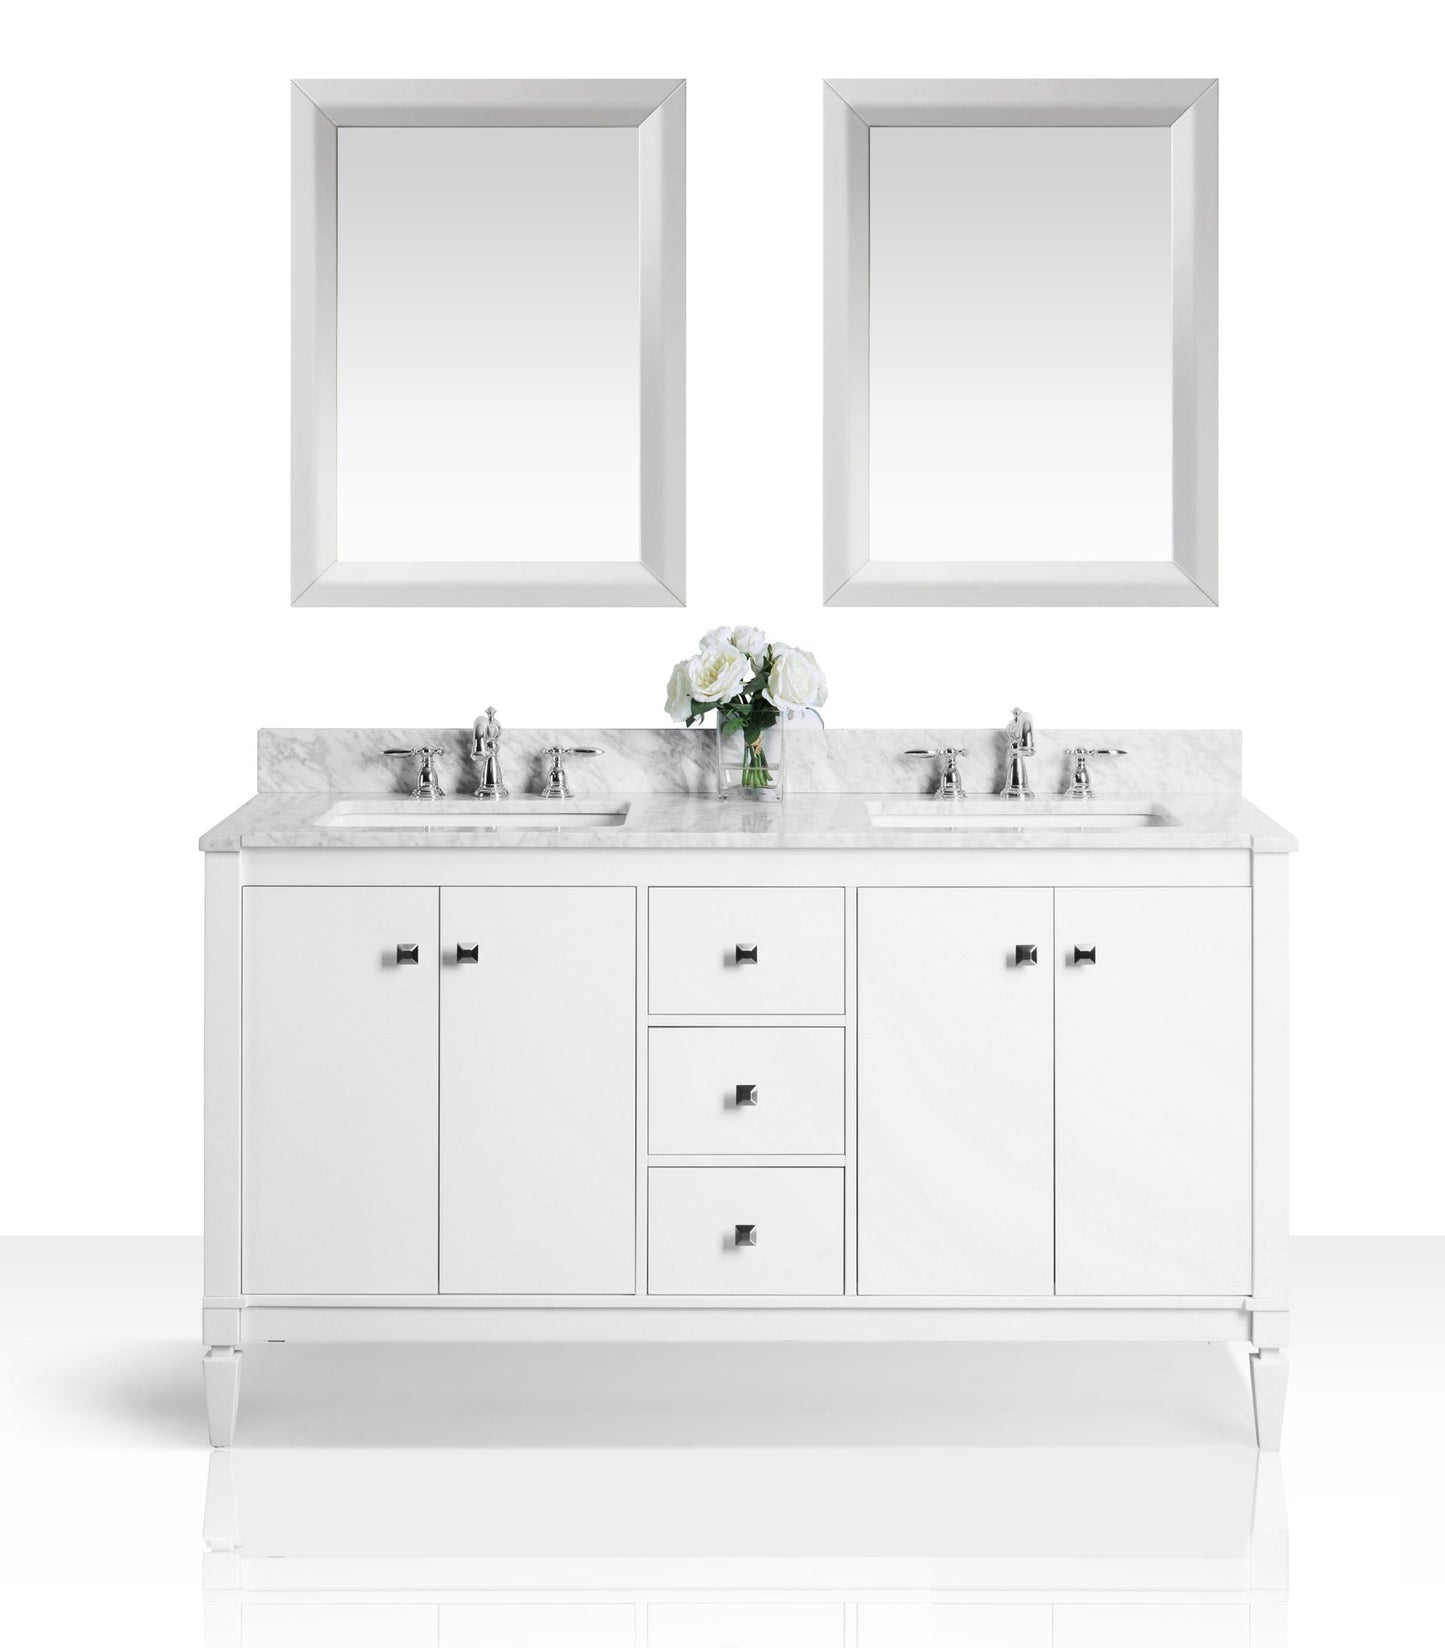 Kayleigh 60 in. Double Bath Vanity Set in White with 24 in. Mirror with Carrara White Marble Countertop